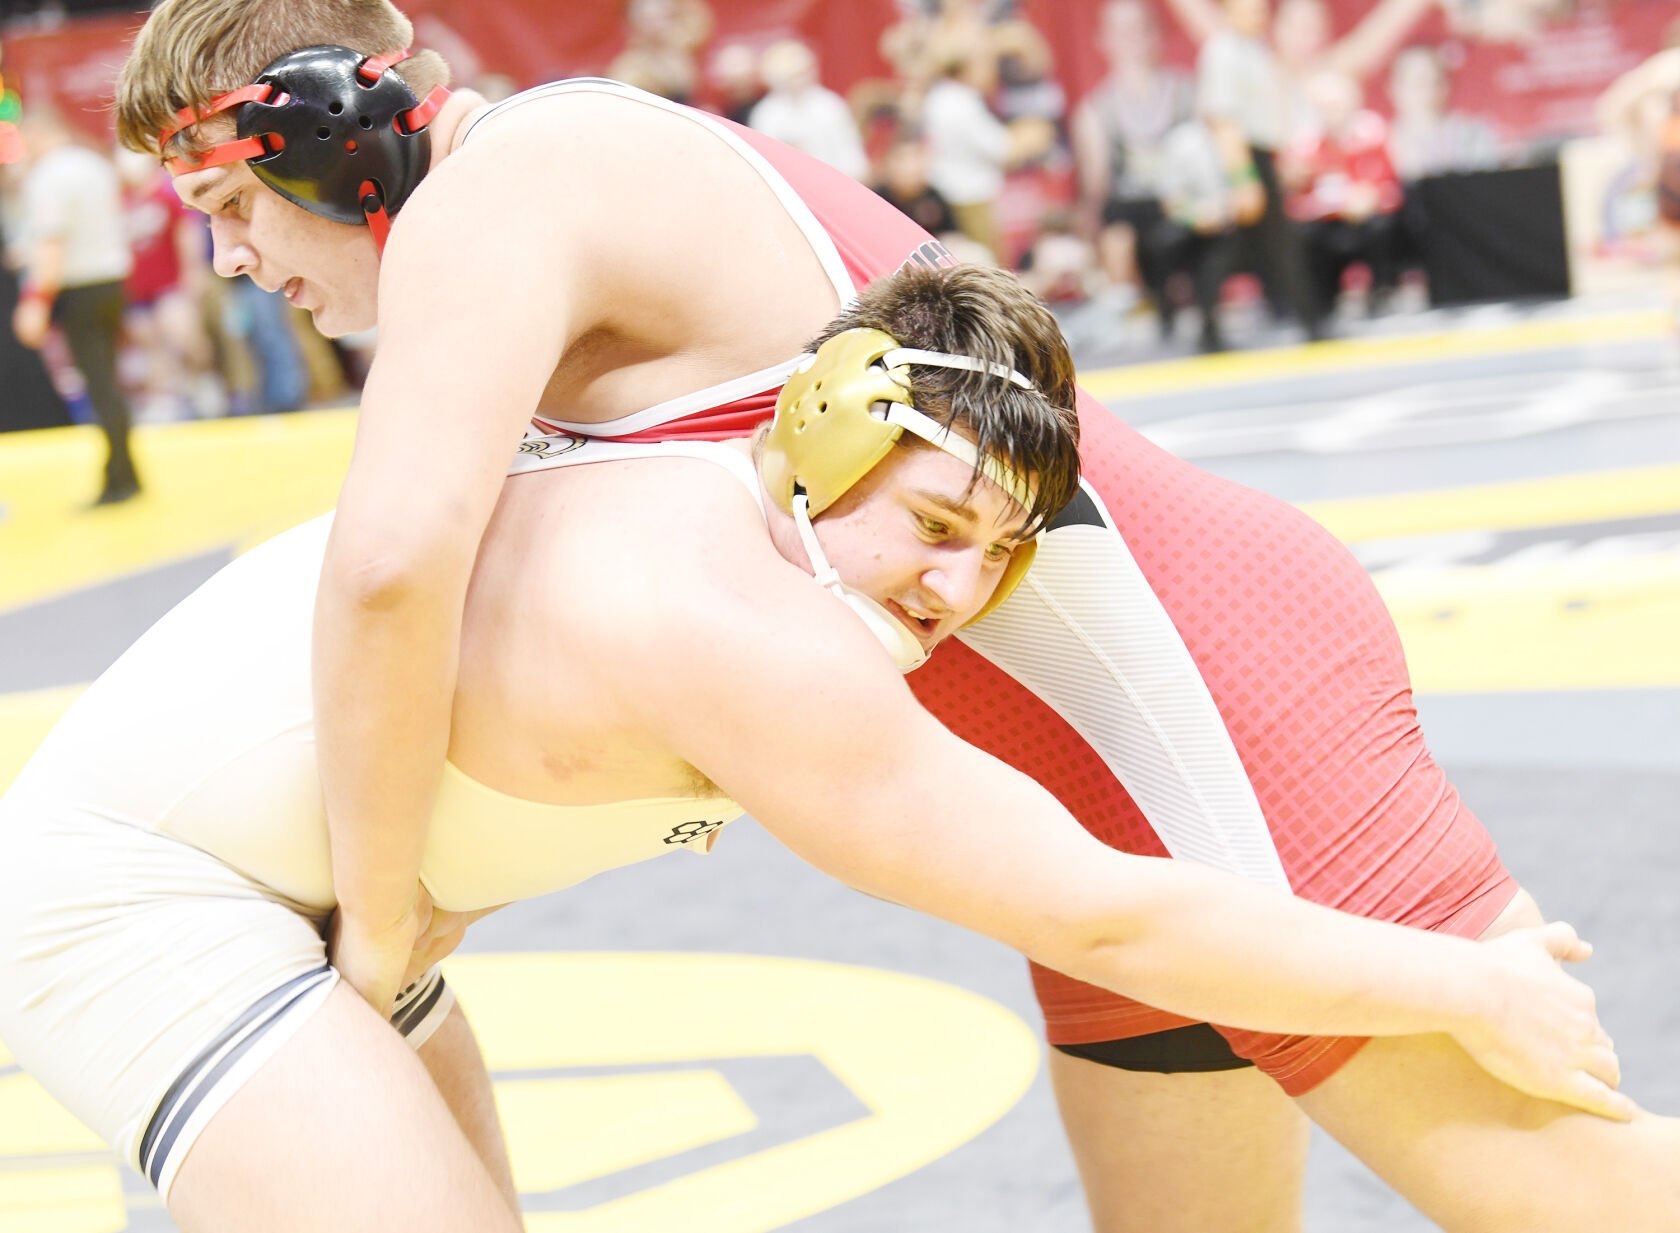 Ohio State Wrestling Tournament Update: Edwards Victorious, Vencill Focused on Progressing